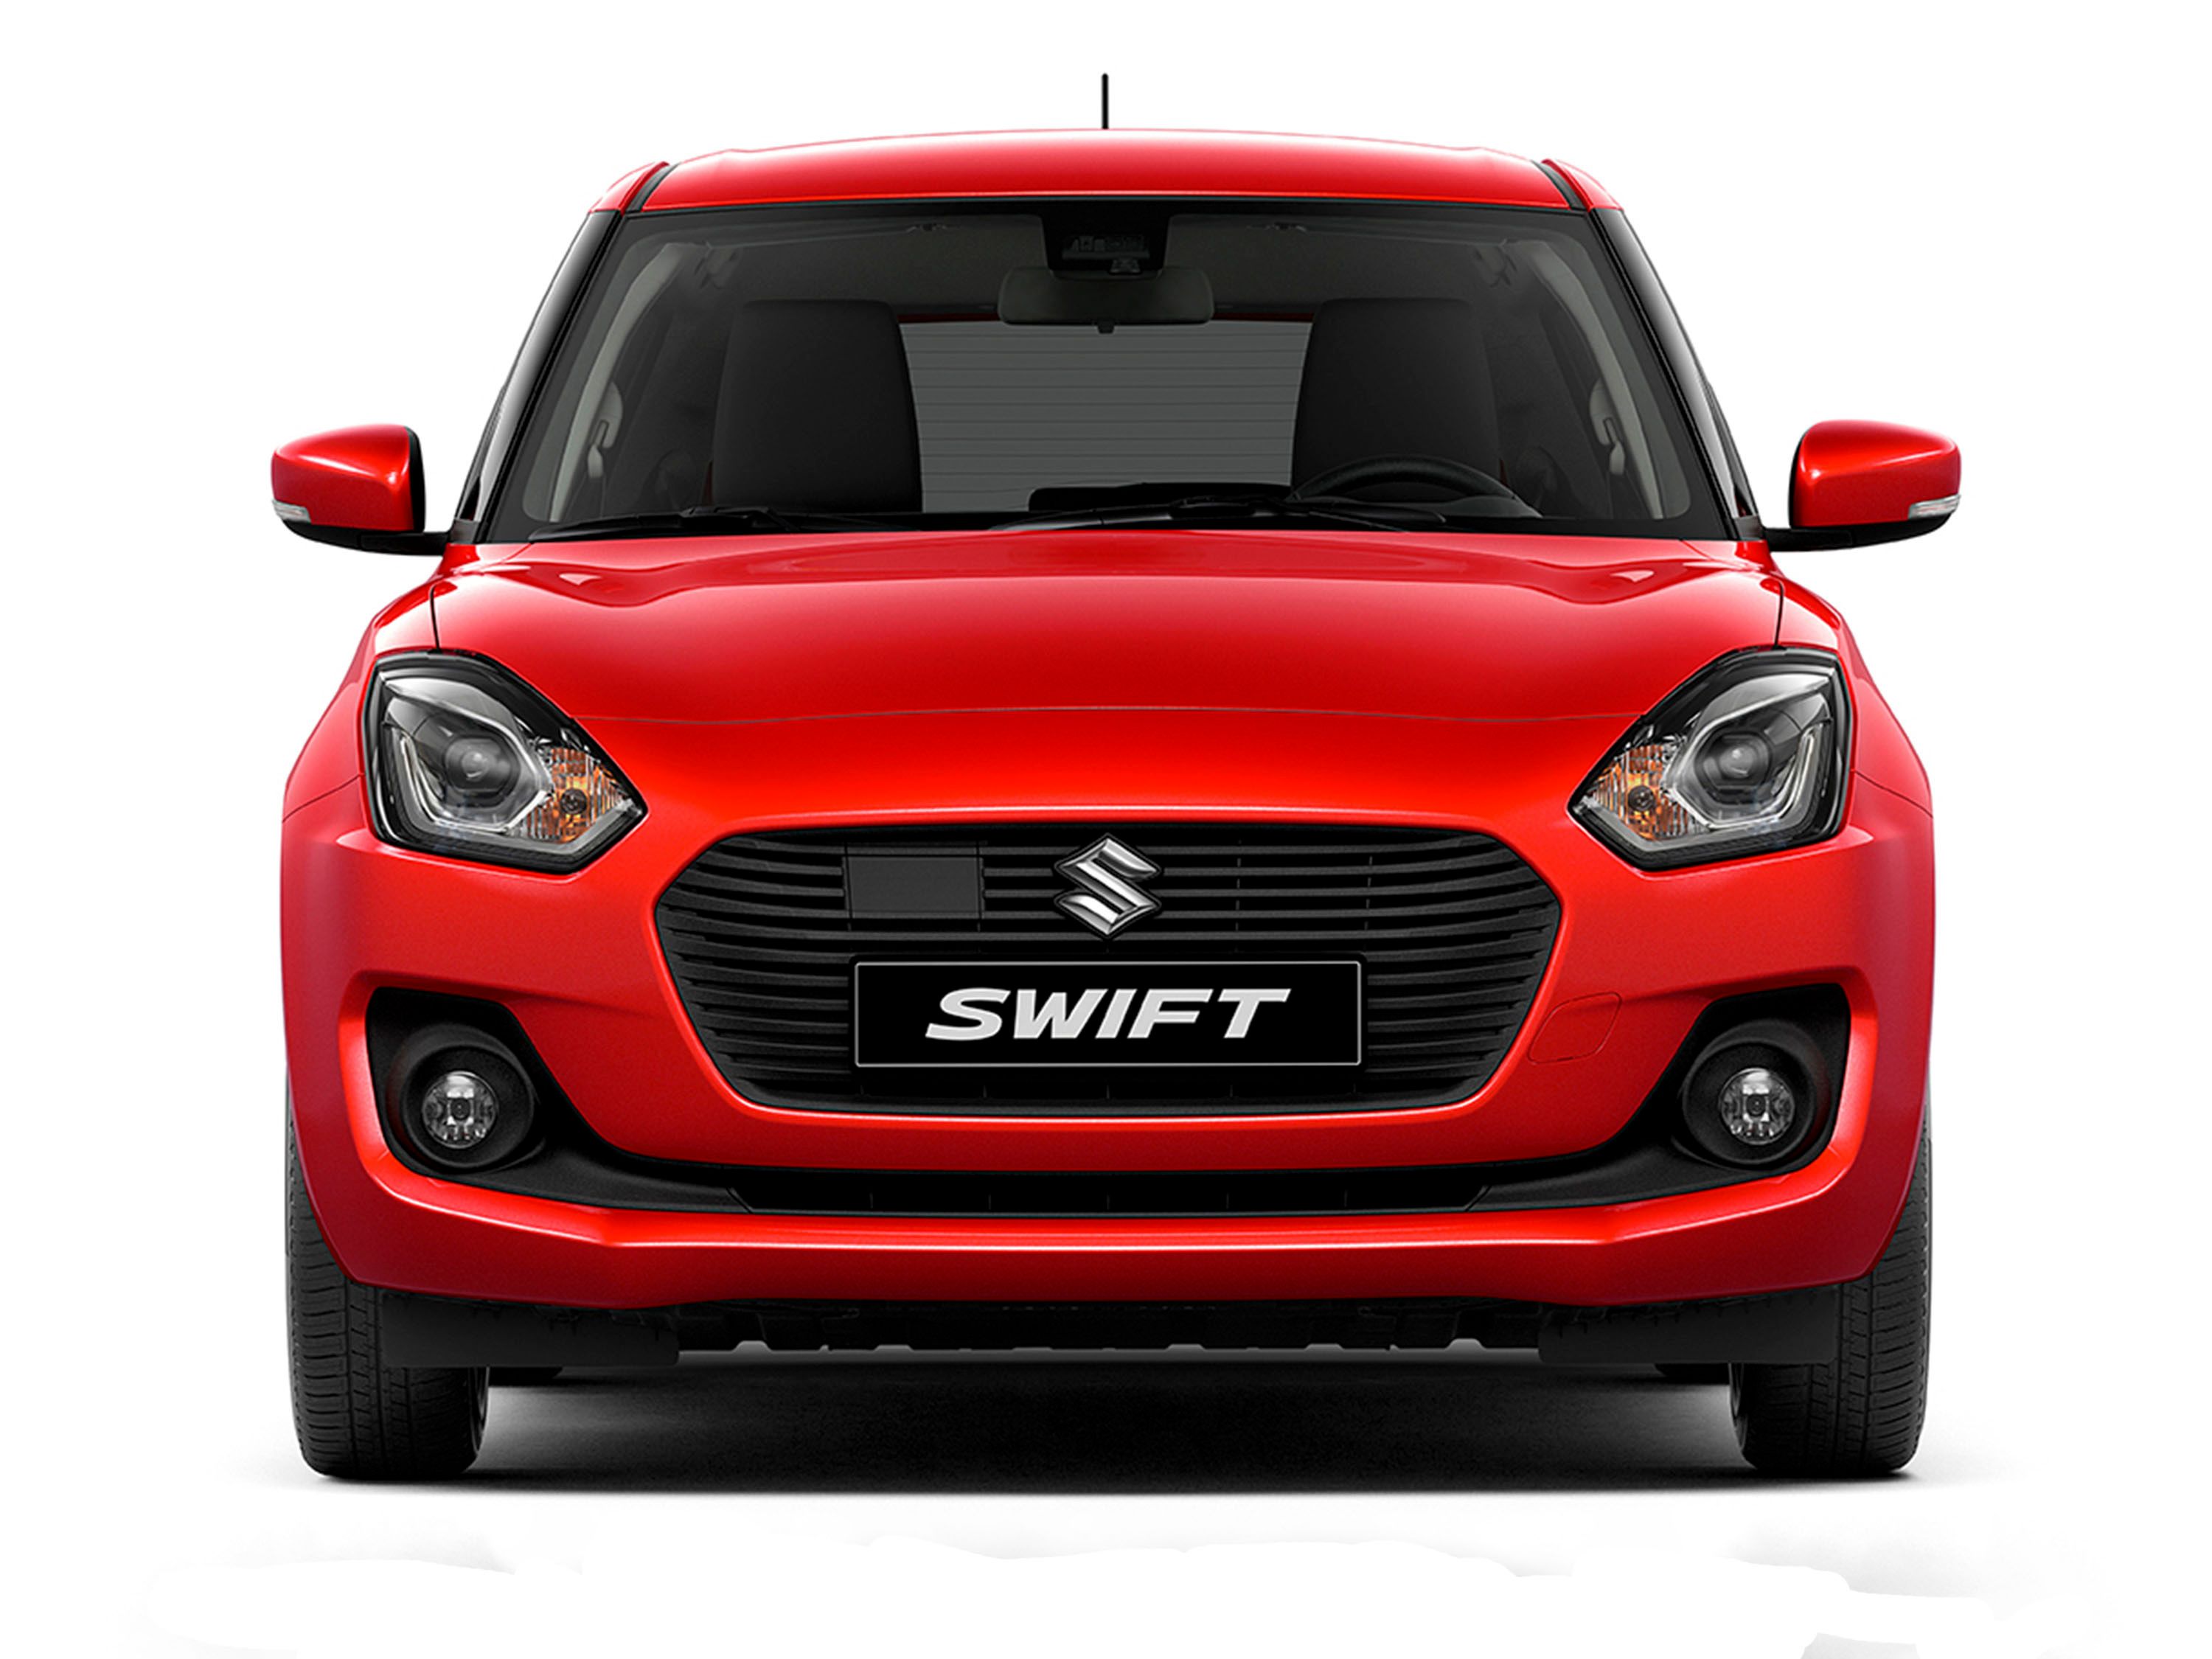 The new Suzuki Swift Is Lighter and More Fuel Efficient